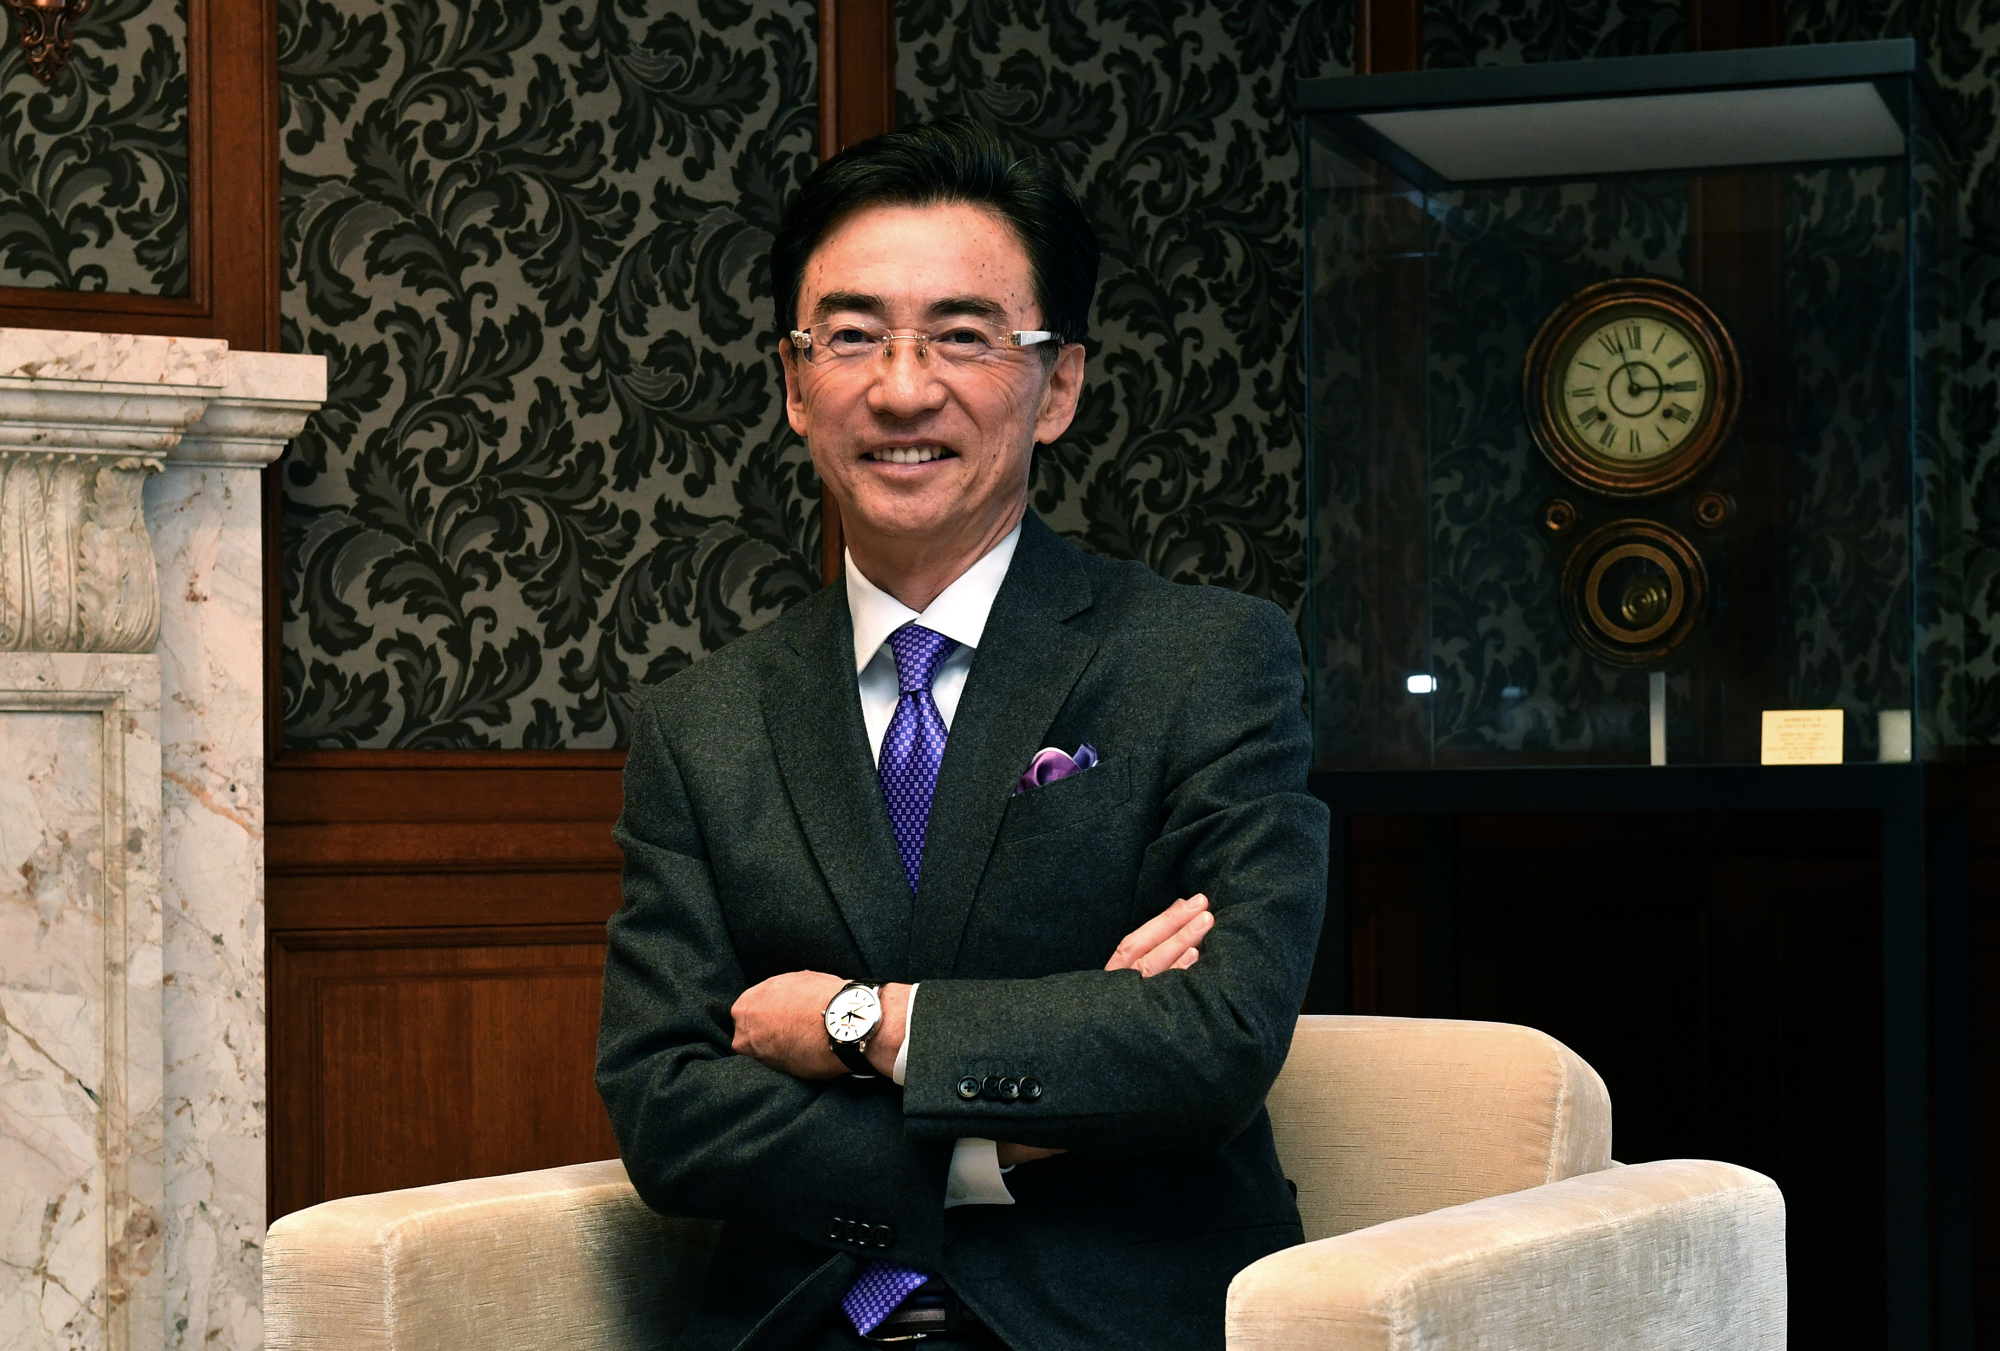 Changing times: Seiko eyes global luxury watch market as CEO takes iconic  firm in a new direction | The Japan Times